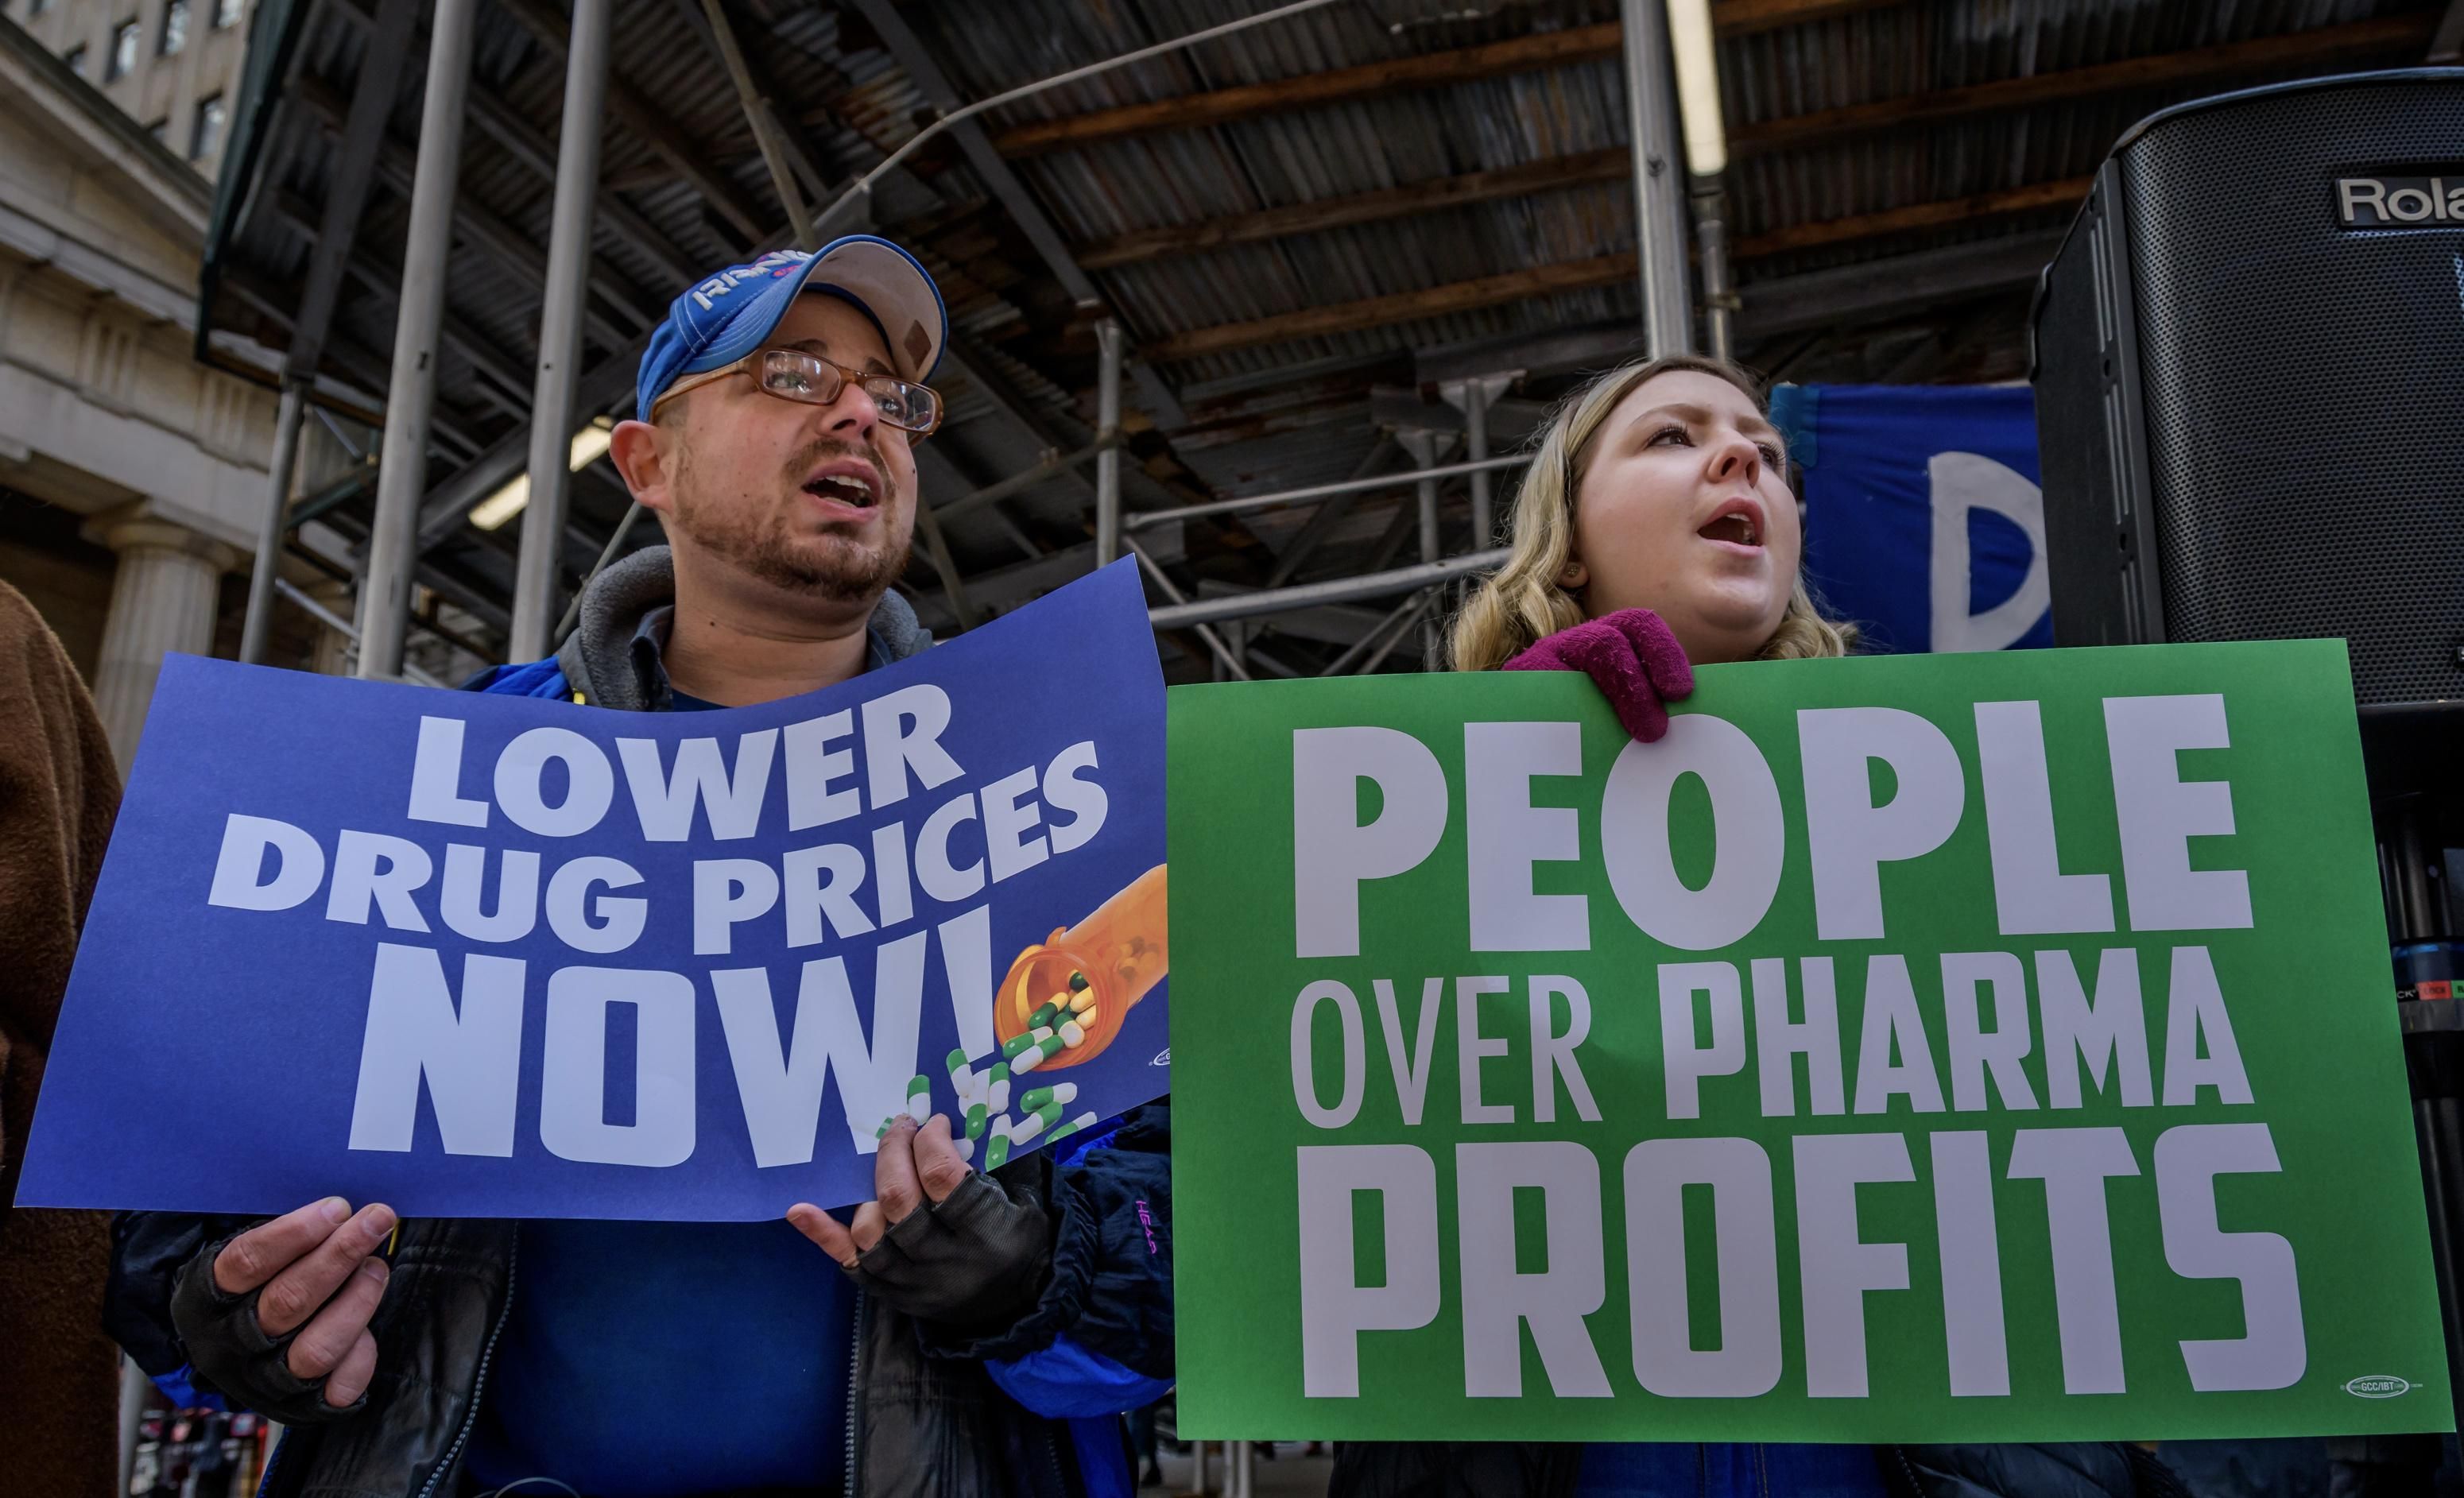 Participants holding protest signs at the rally. People living with diabetes, activists, faith leaders, and health care advocates rallied in front of the New York Stock Exchange to commemorate World Diabetes Day 2019, as part of a National Day of Action called by the Lower Drug Prices Now Campaign. (Photo by Erik McGregor/LightRocket via Getty Images)